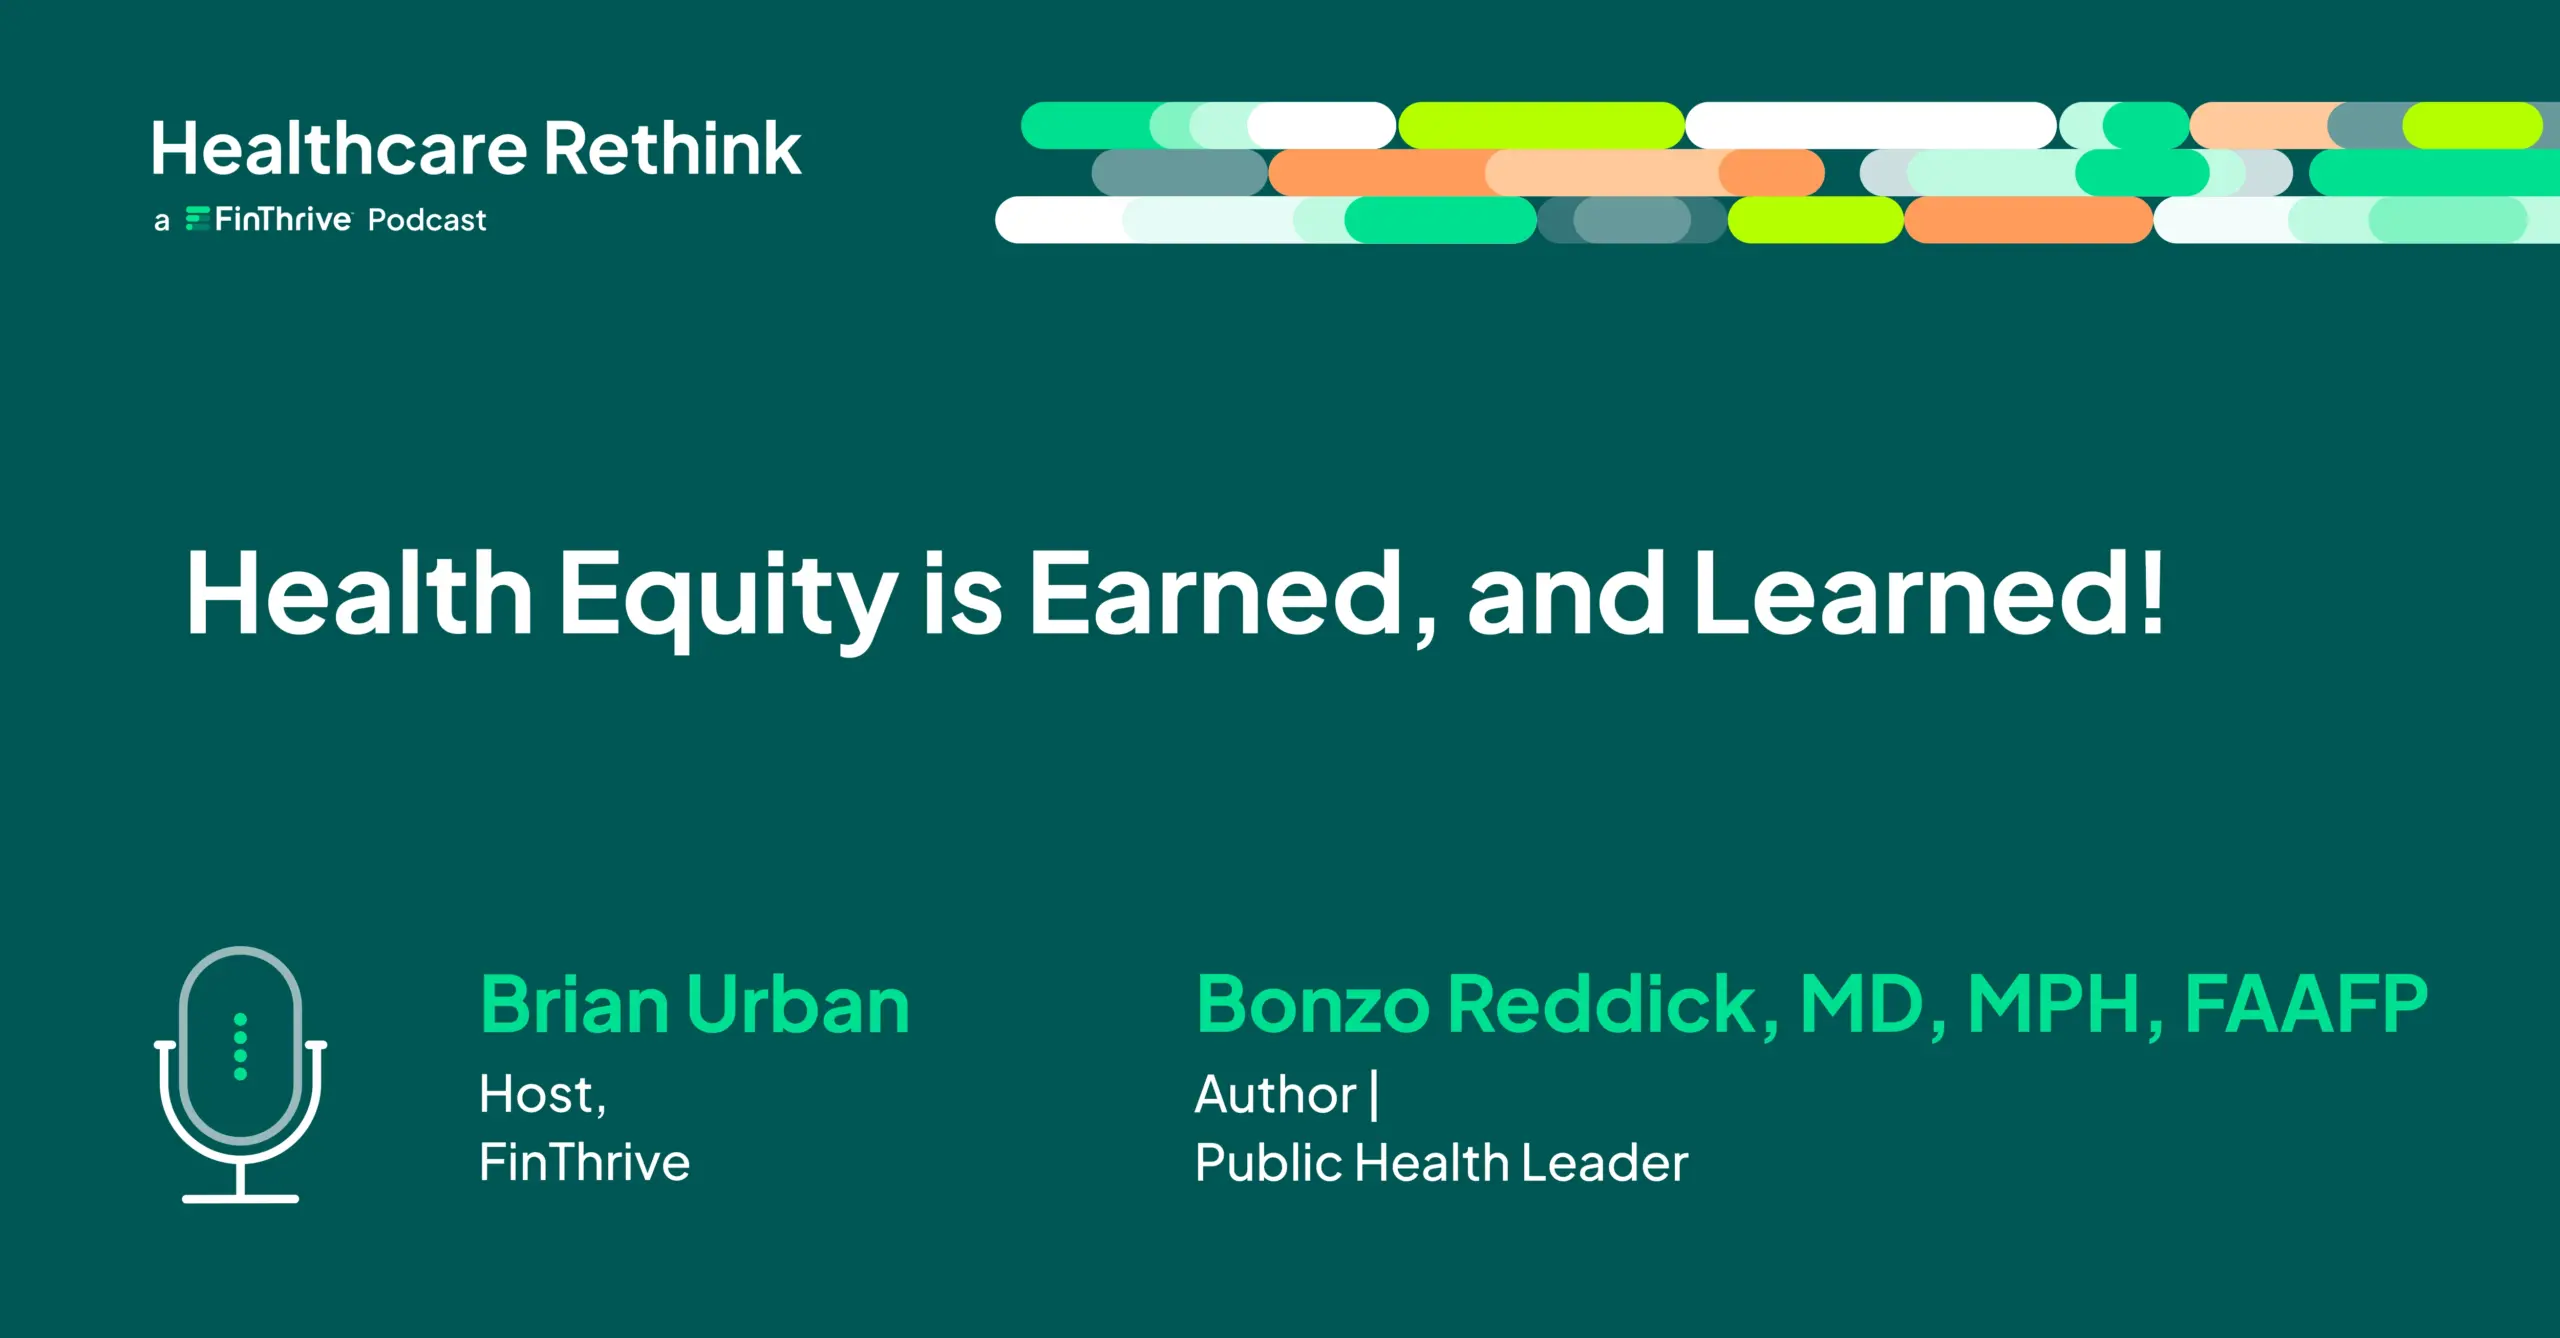 Earned and Learned: Health Equity is Attainable through Effort and Education